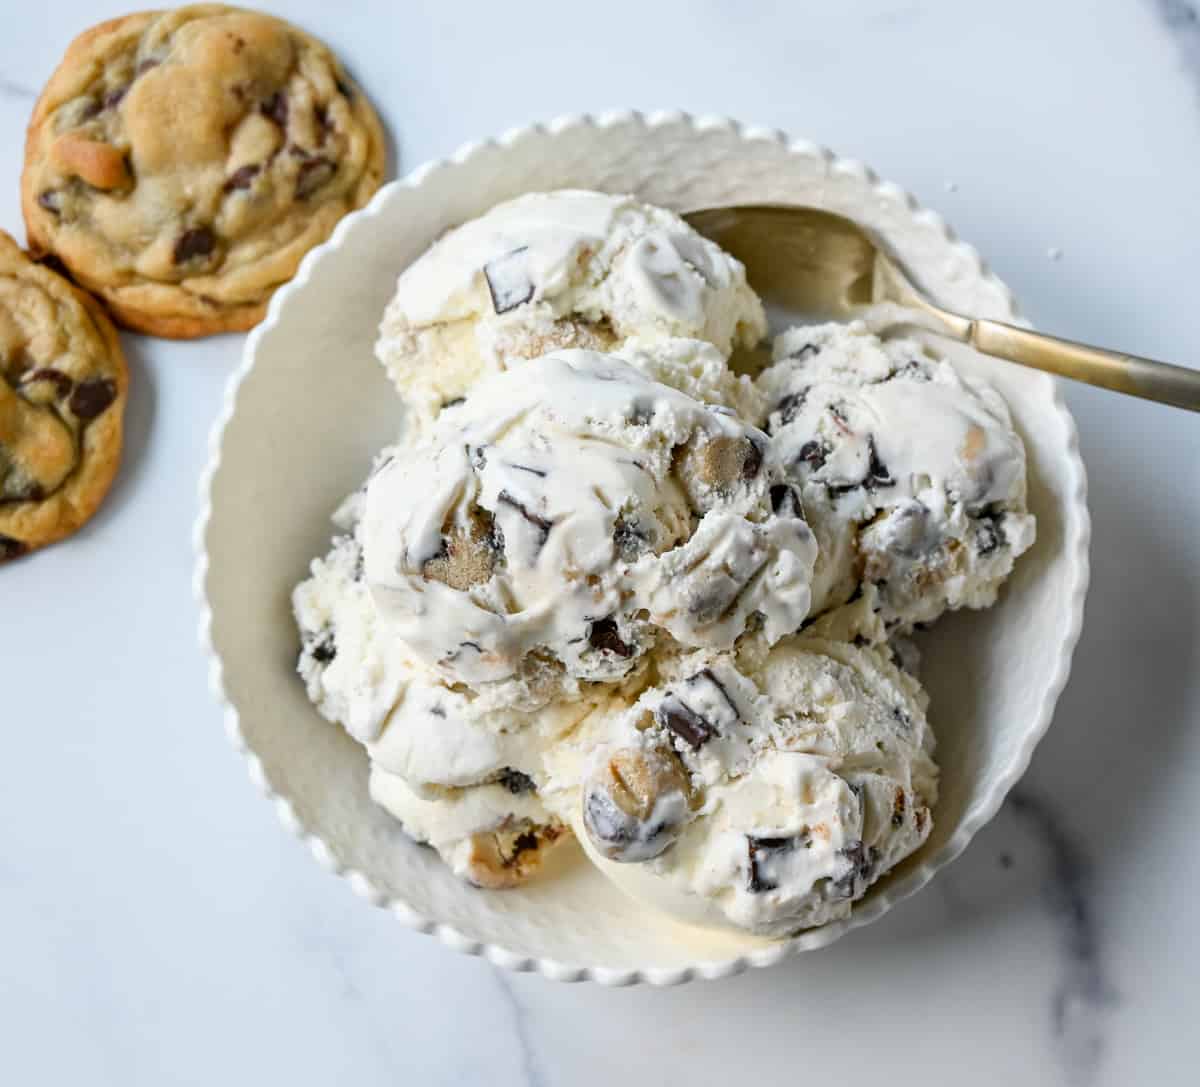 How to make creamy chocolate chip cookie dough at home. It is so easy to make edible chocolate chip cookie dough perfectly paired with vanilla bean ice cream. The easiest and best homemade chocolate chip cookie dough ice cream recipe!